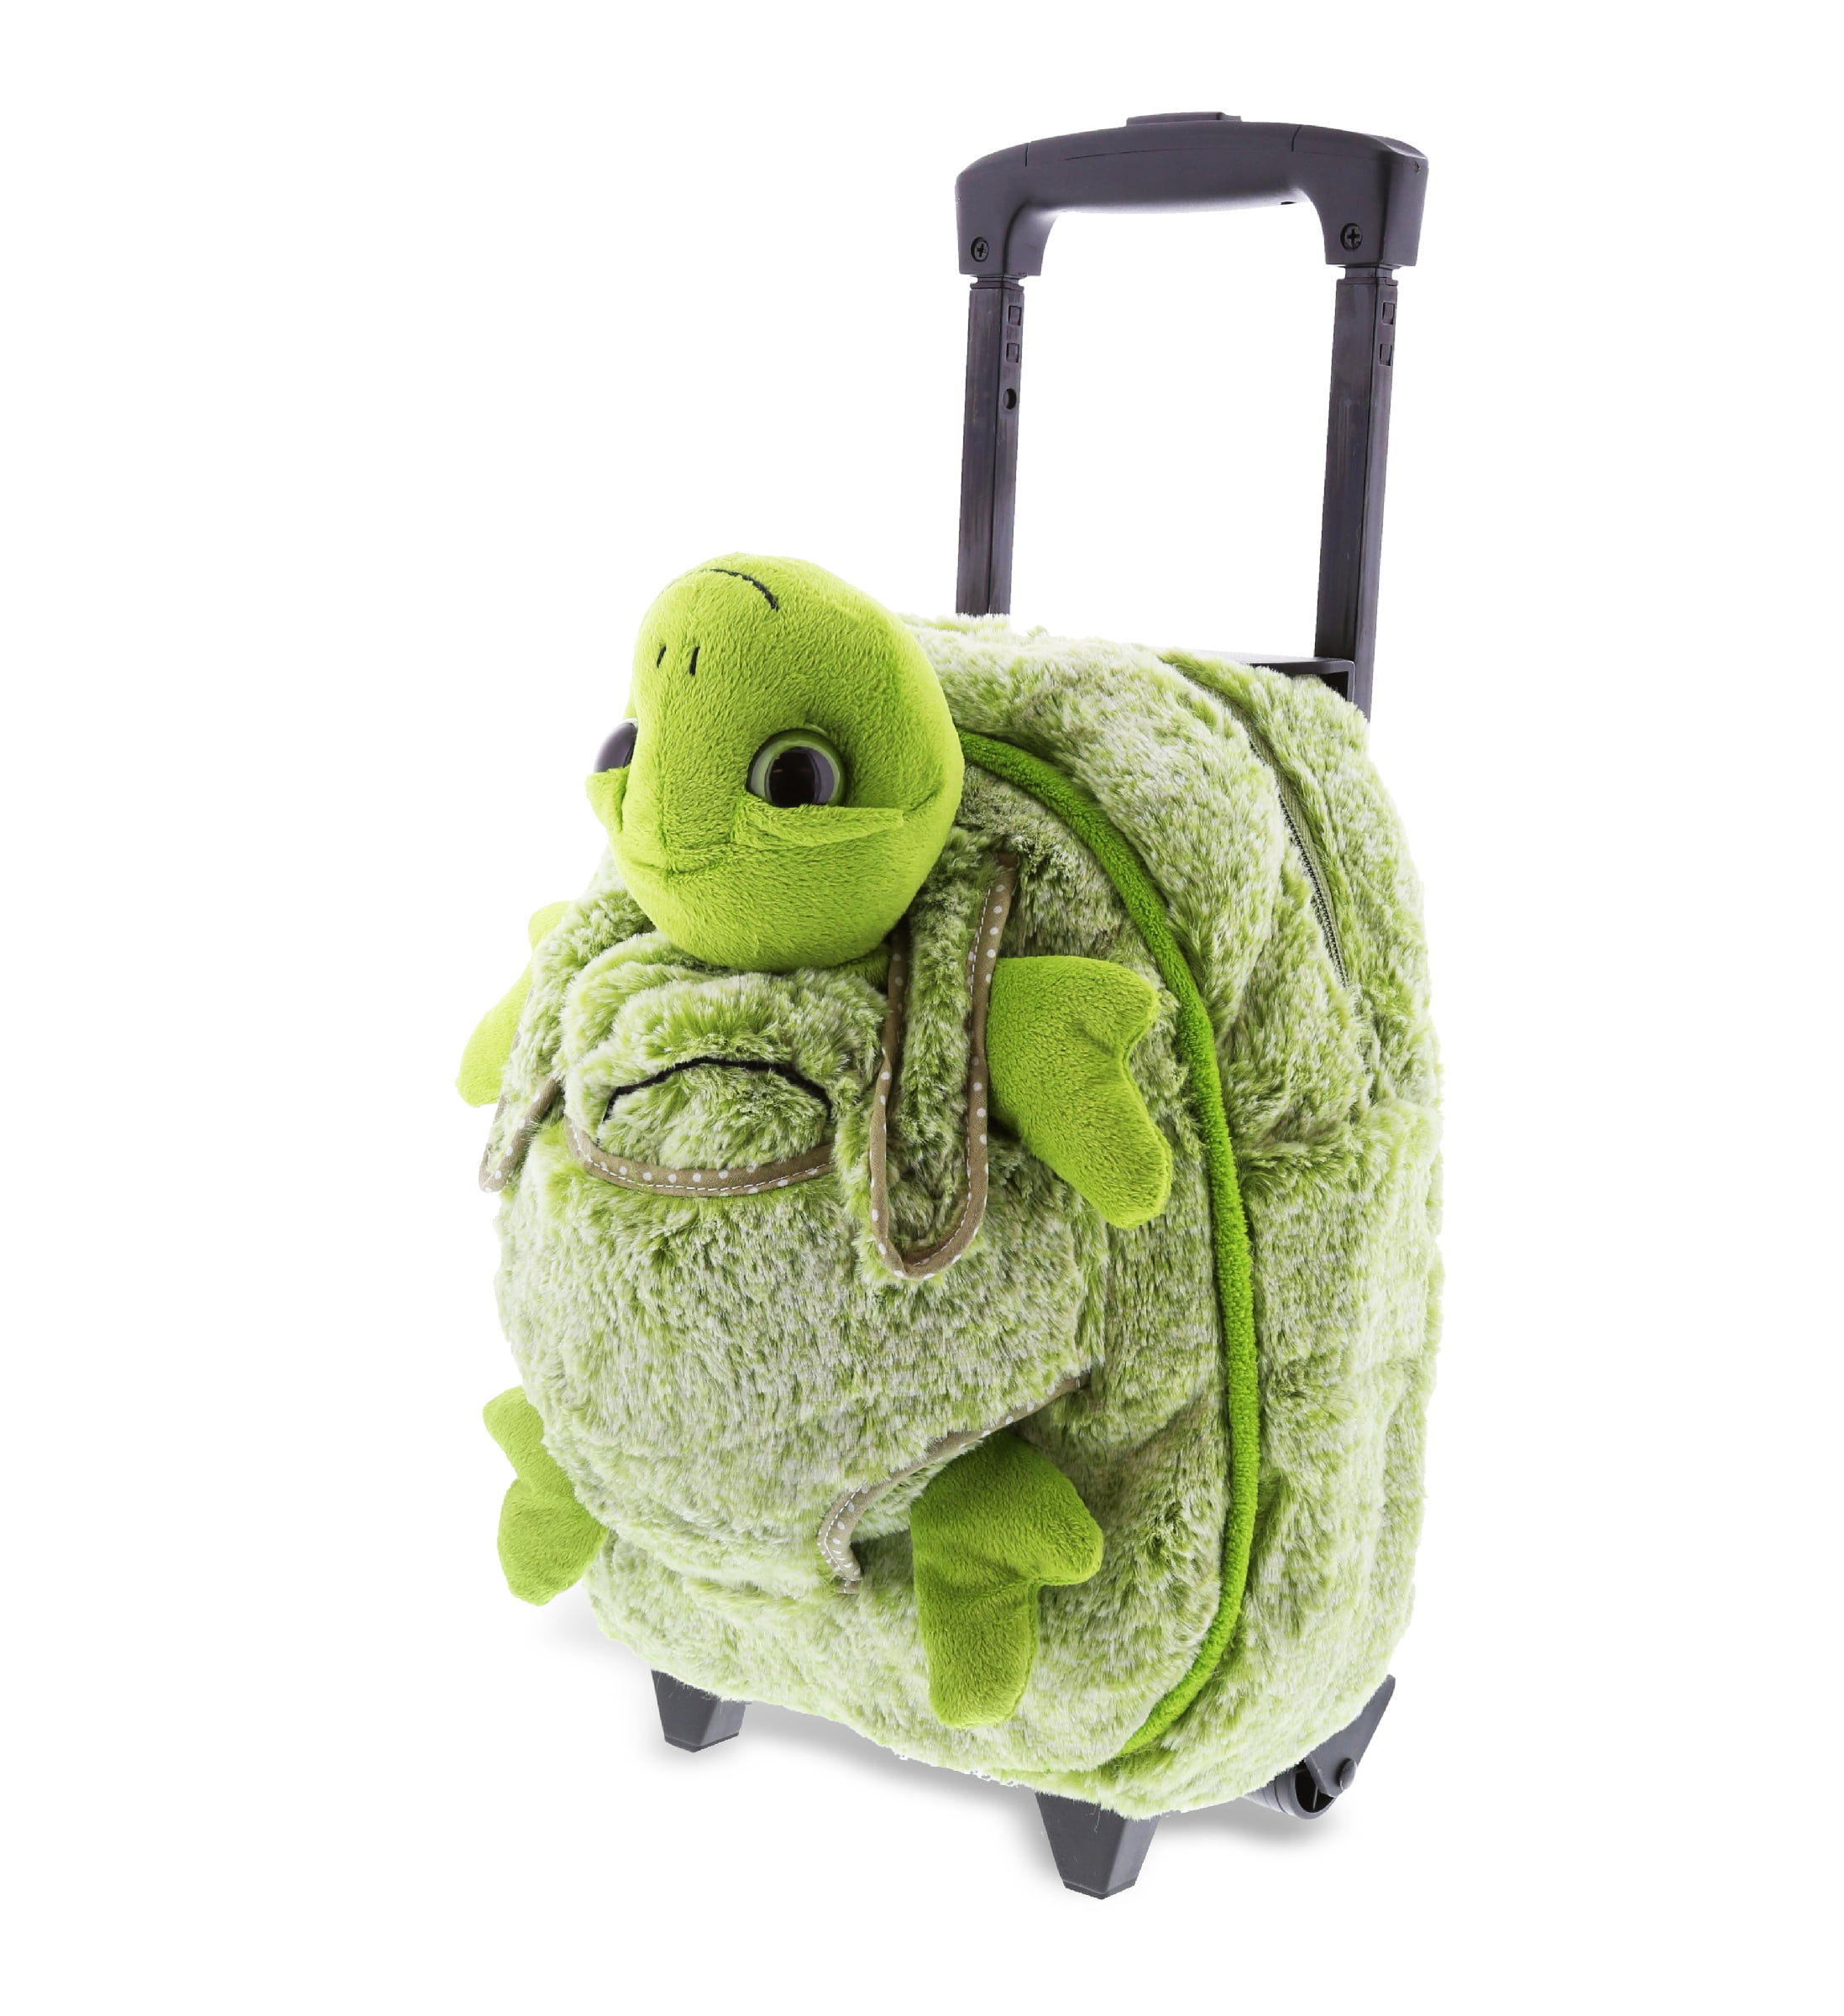 Backpacks Dolphin – Super Soft Plush Trolley & Purse – J Lee Decor and Gifts